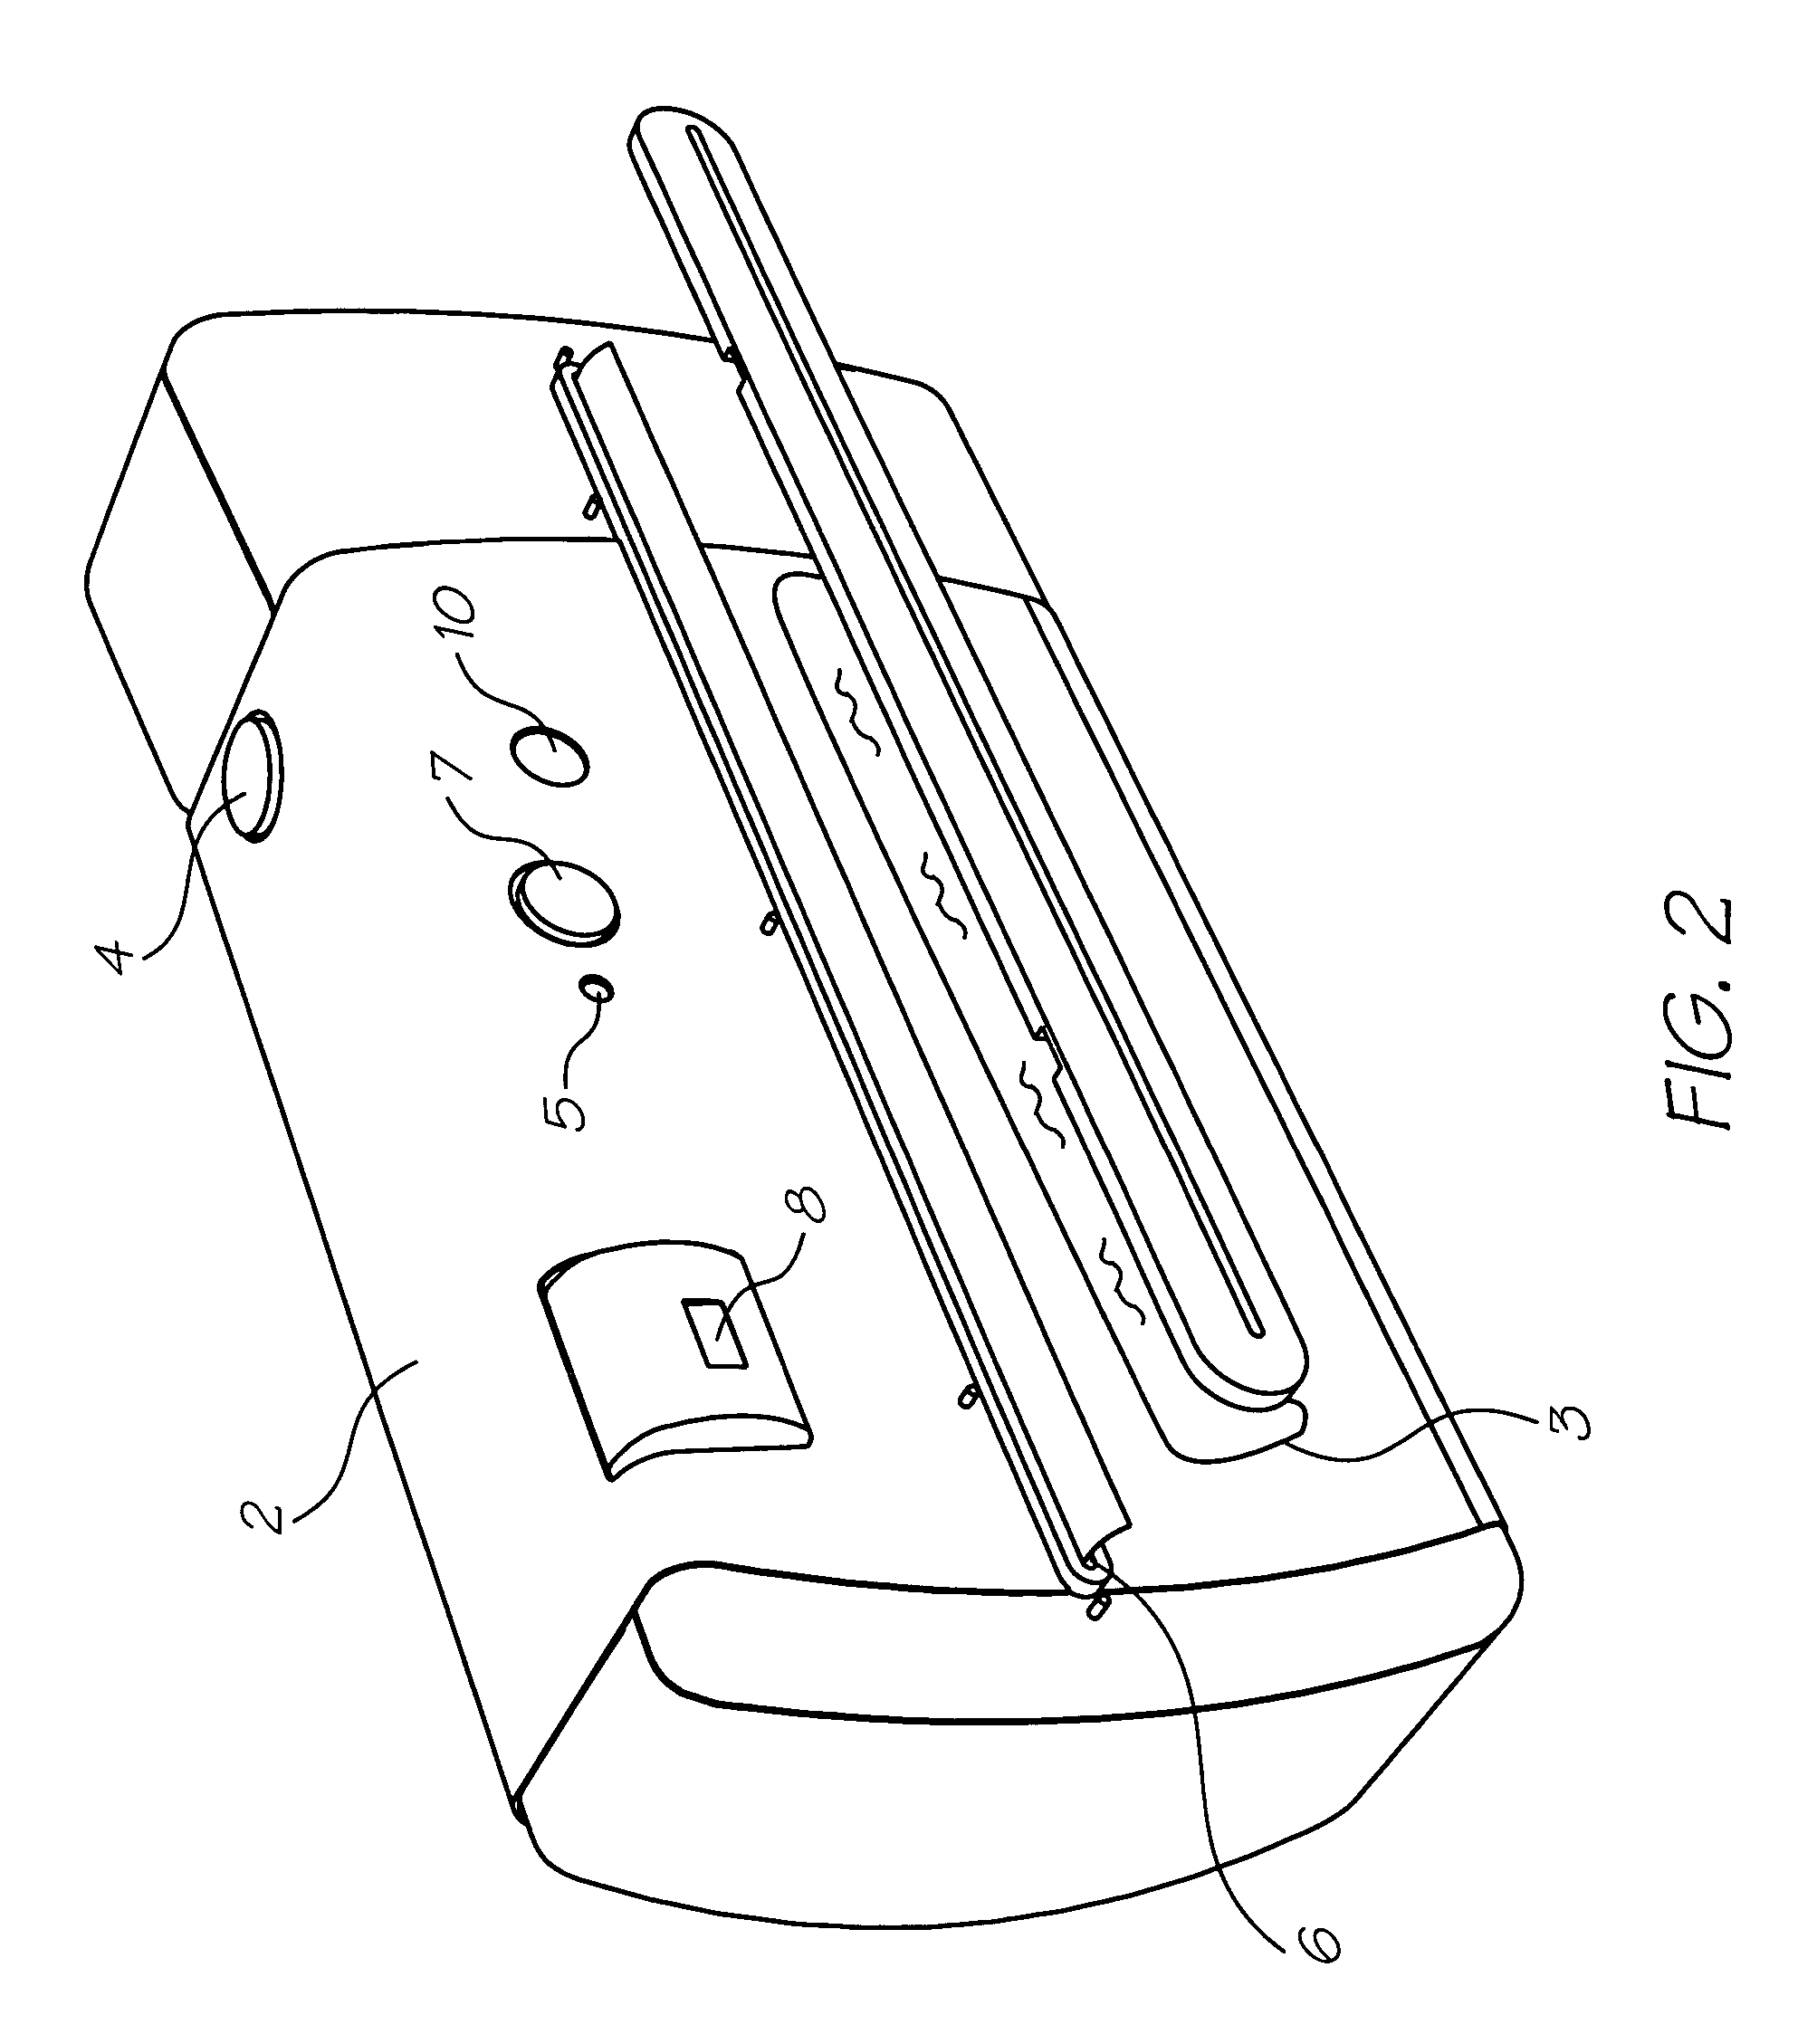 Printing cartridge for a camera and printer combination including an authentication device